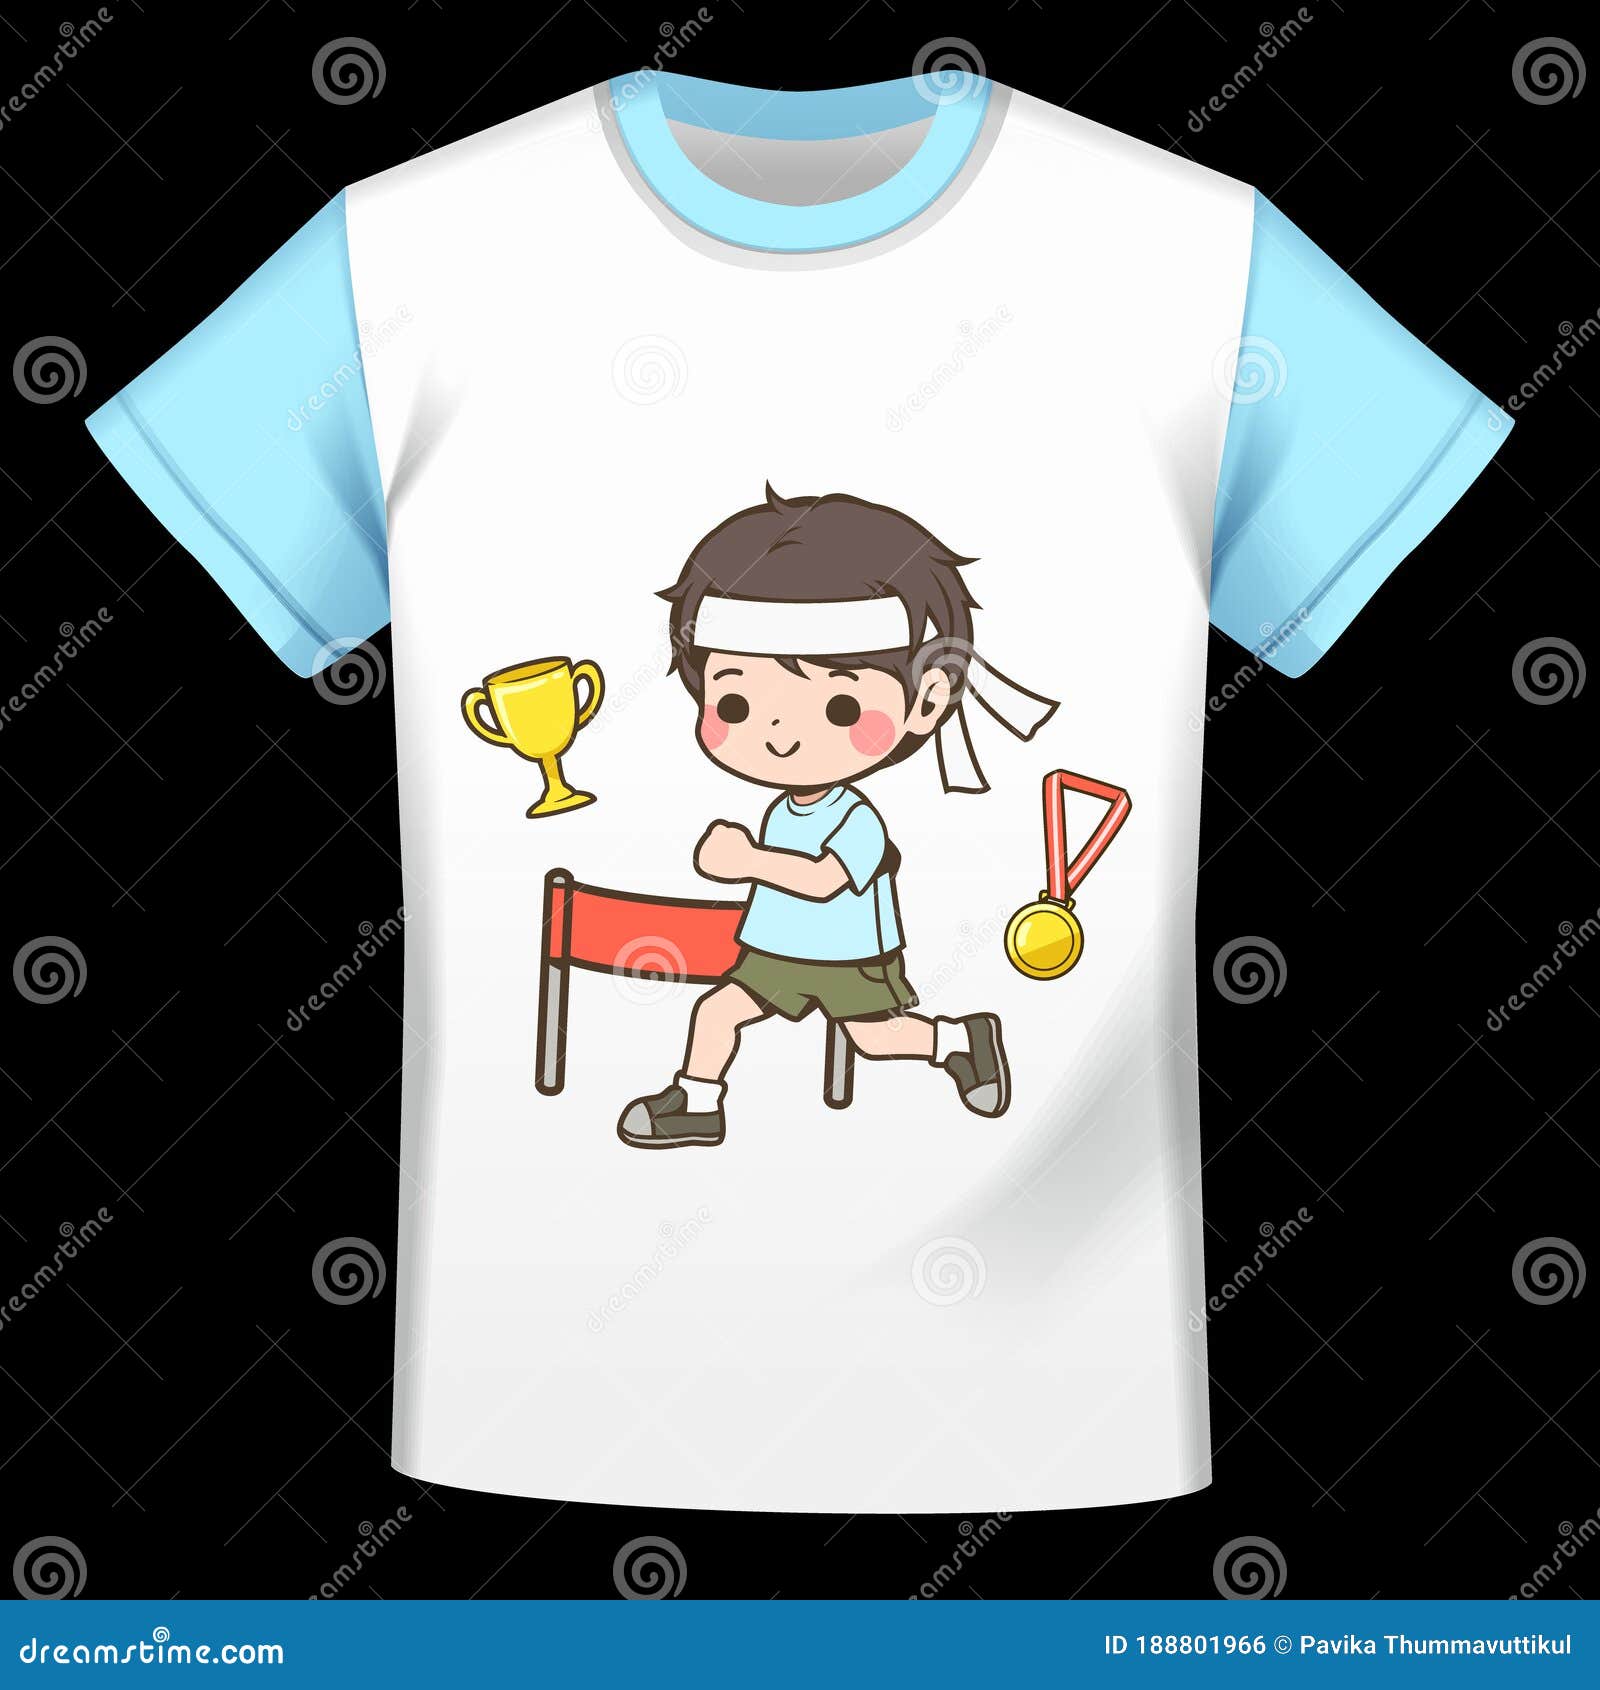 Cartoon Characters, Runners, Boys on T-shirts Vector Illustration Stock  Vector - Illustration of characters, mockup: 188801966